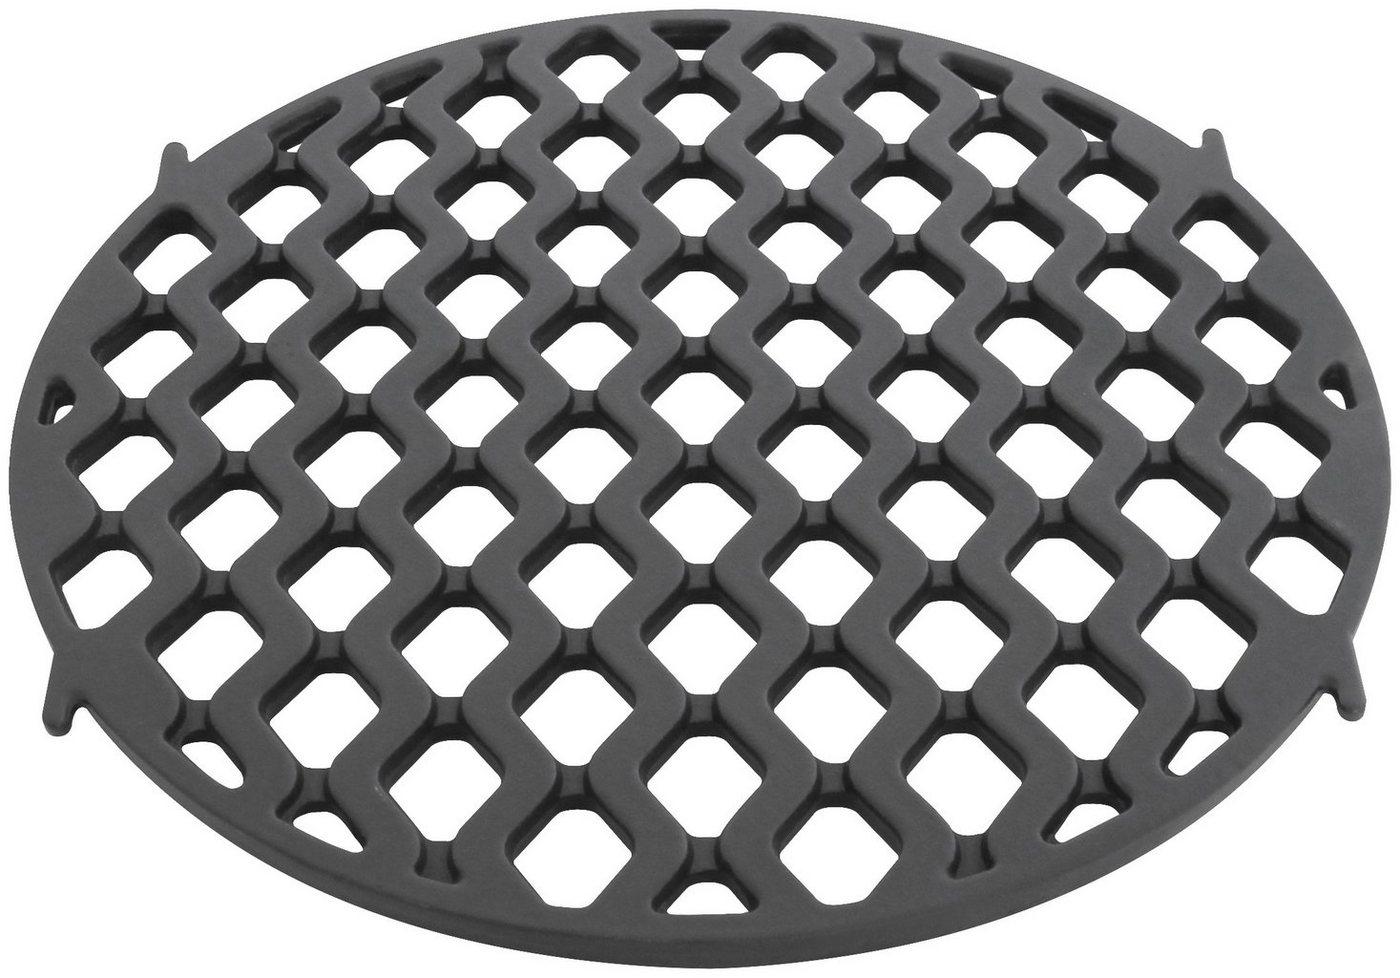 Enders® Grillrost SWITCH GRID Sear Grate, BxT: 30x30 cm von Enders®